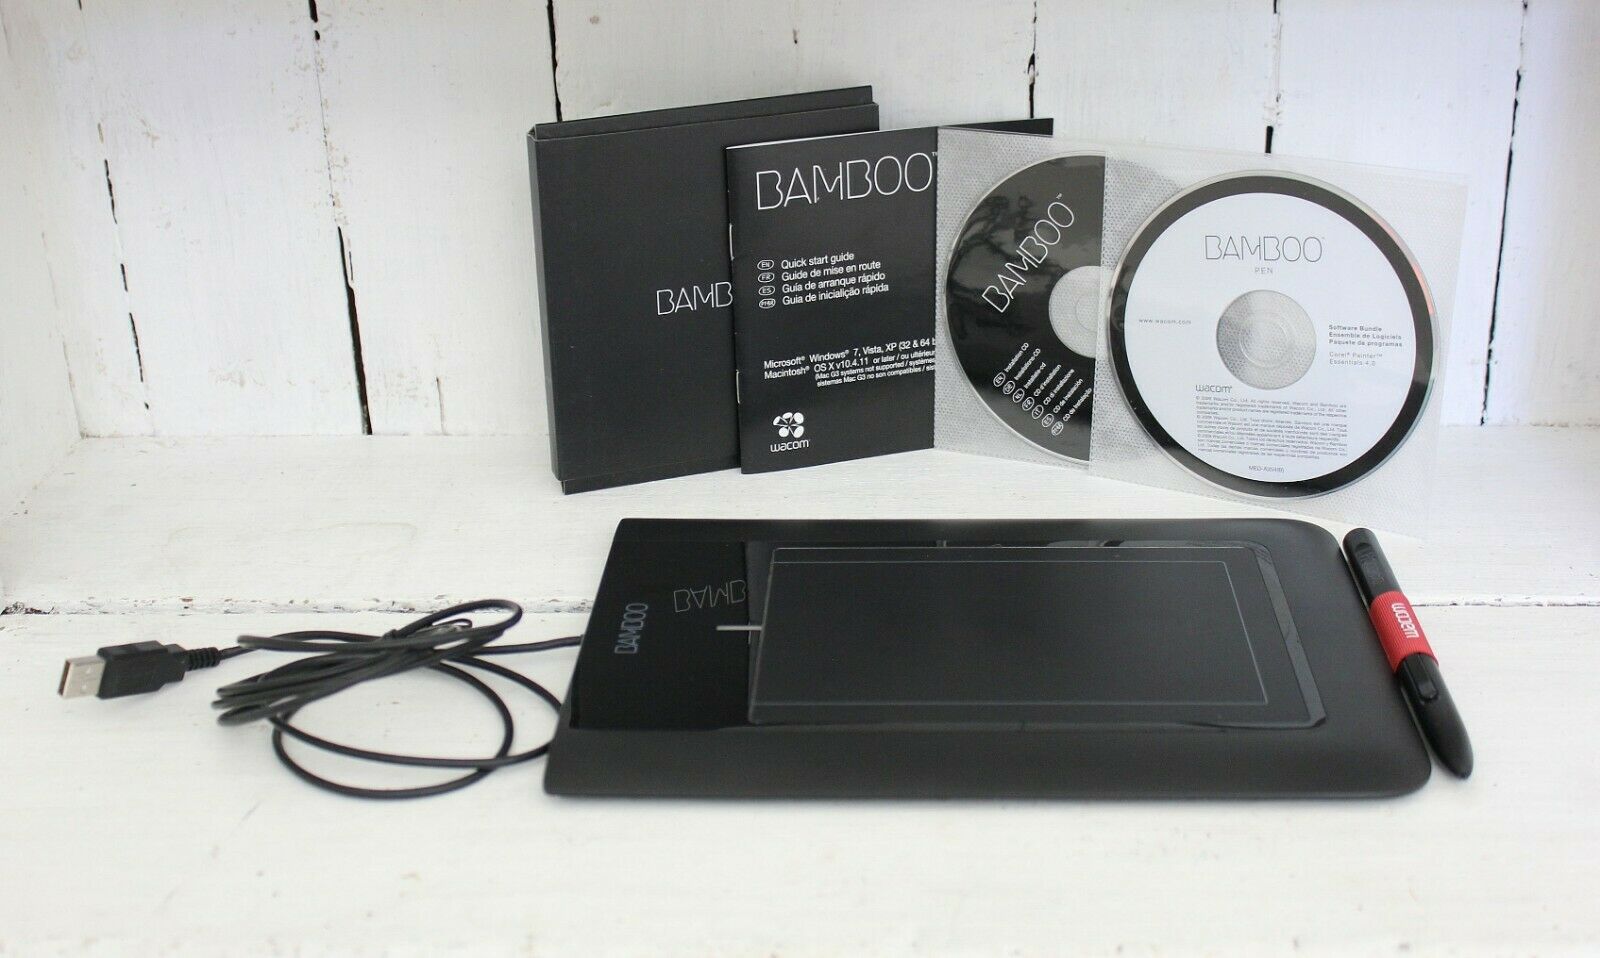 CTL460 Black Bamboo Drawing Tablet with Pen and Driver Discs